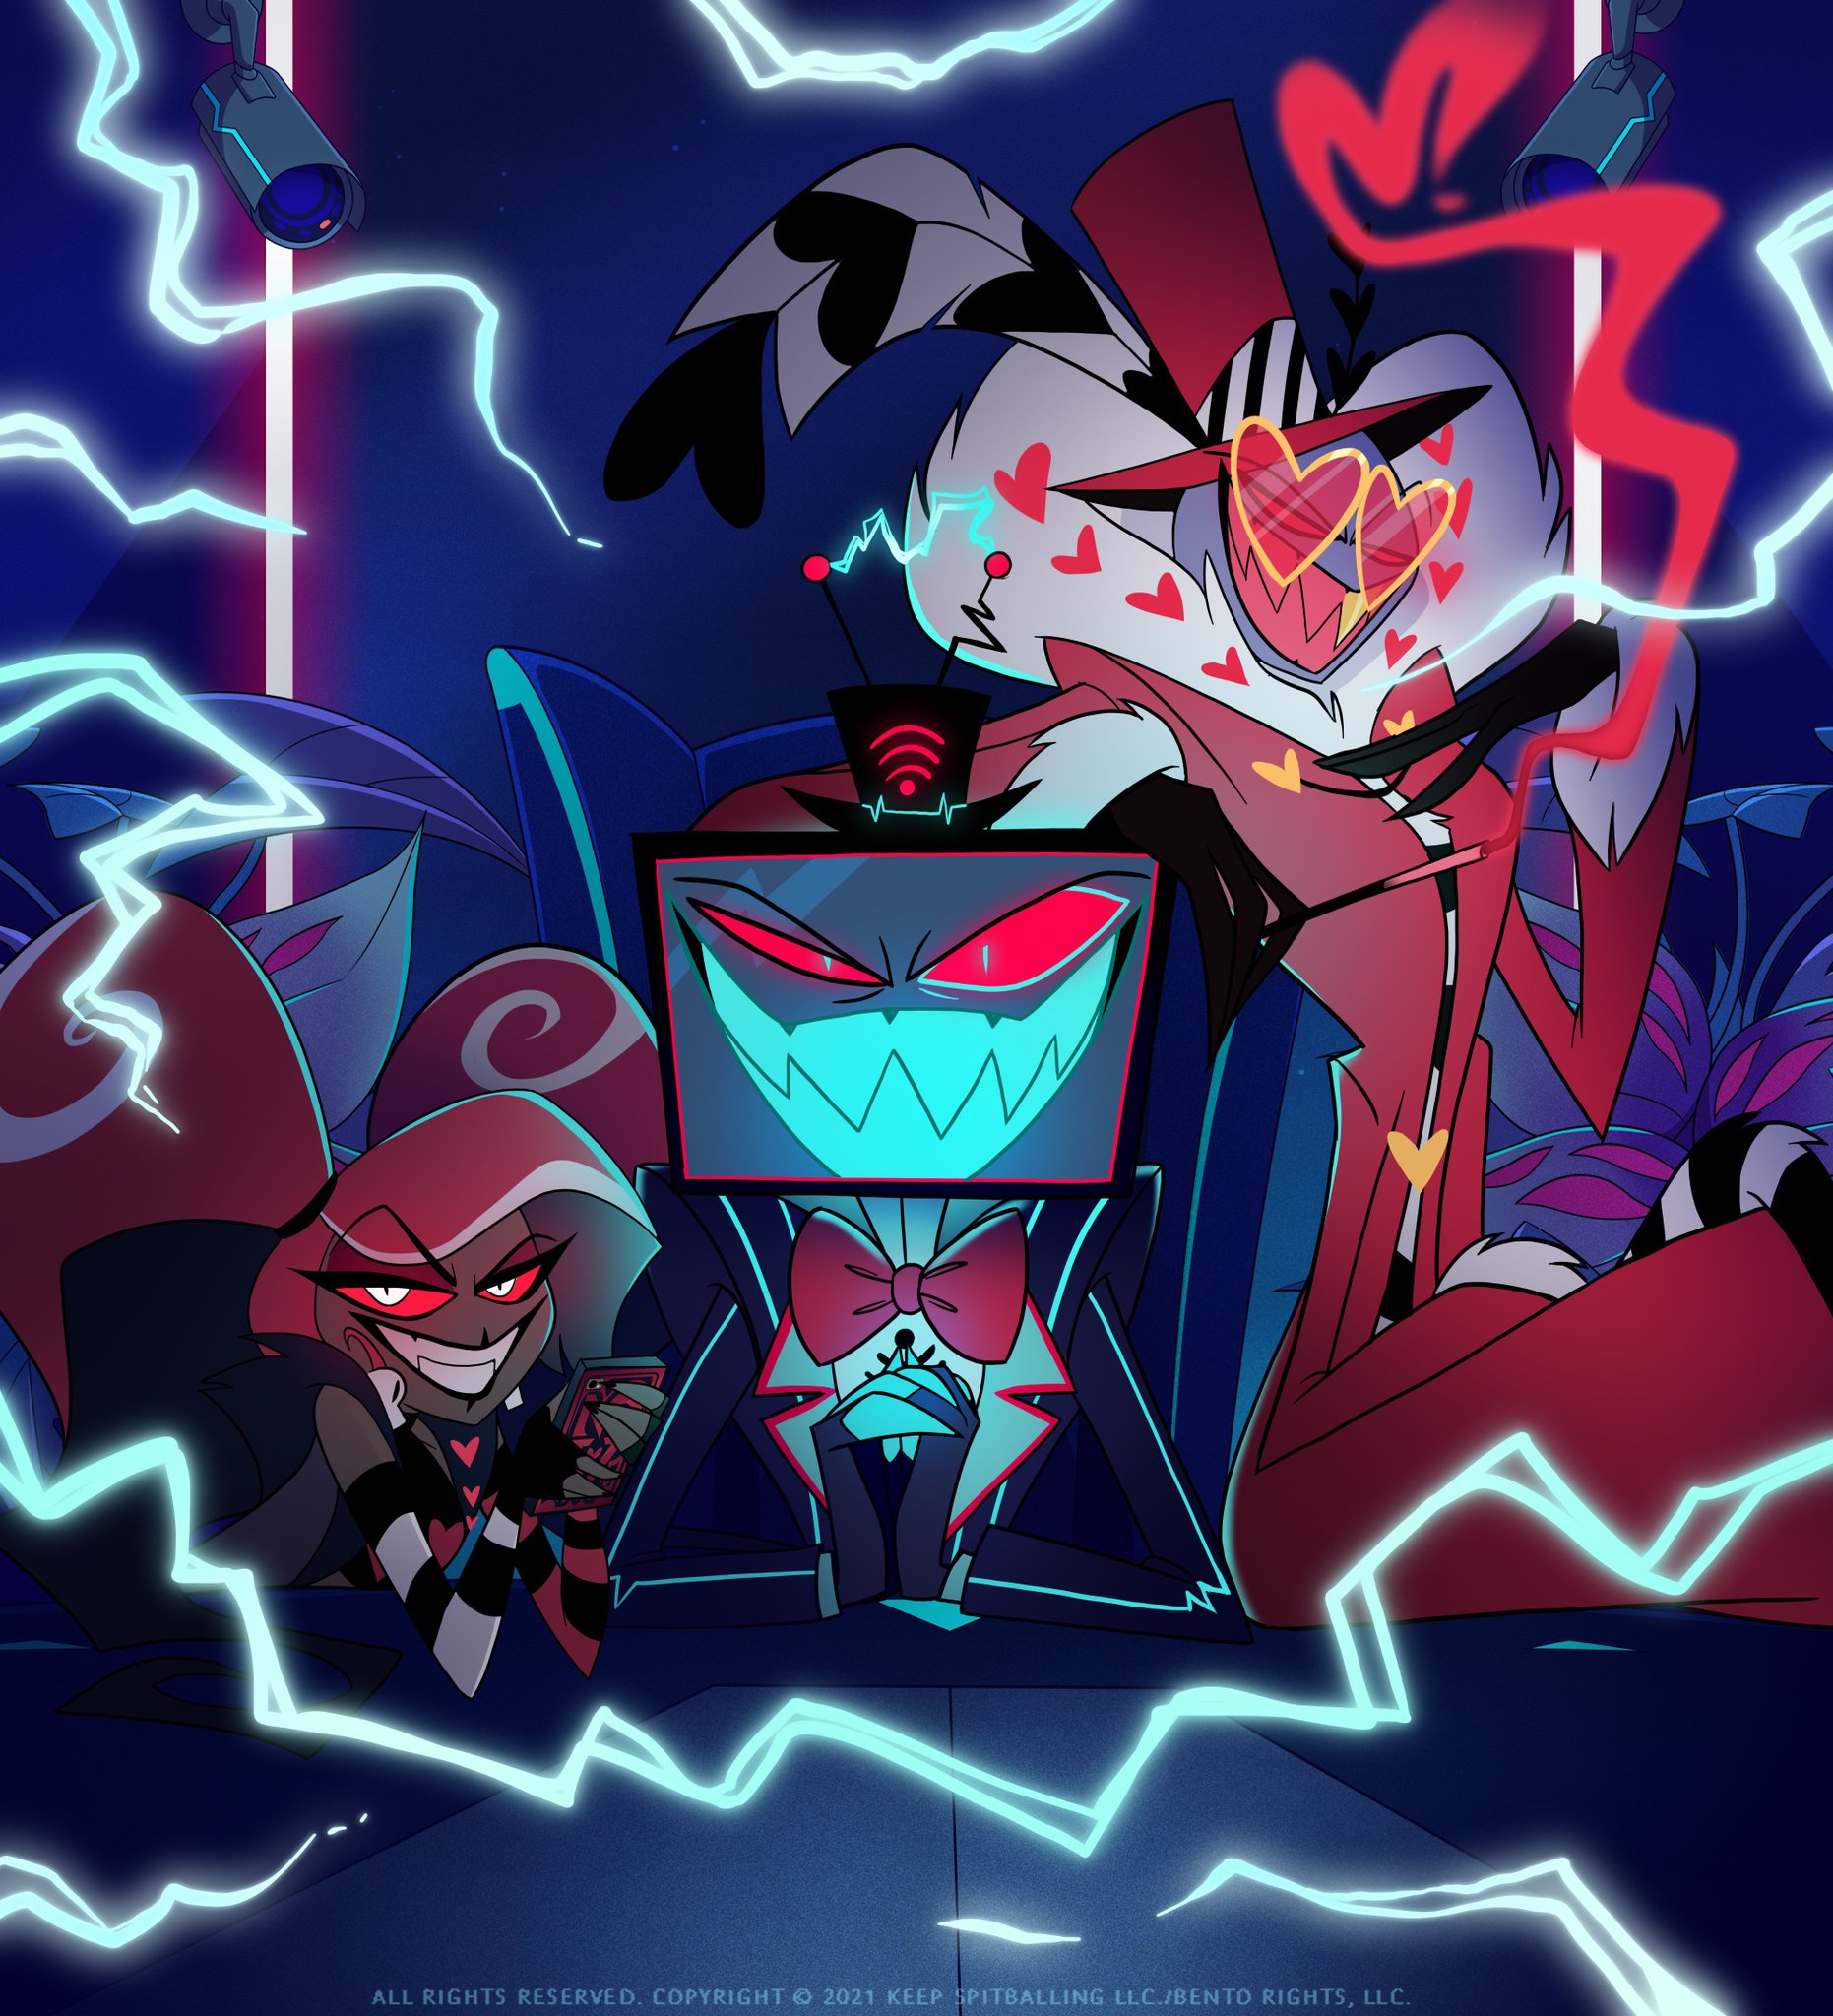 New 'Hazbin Hotel' Images Promise Colorful Chaos in the Musical Series